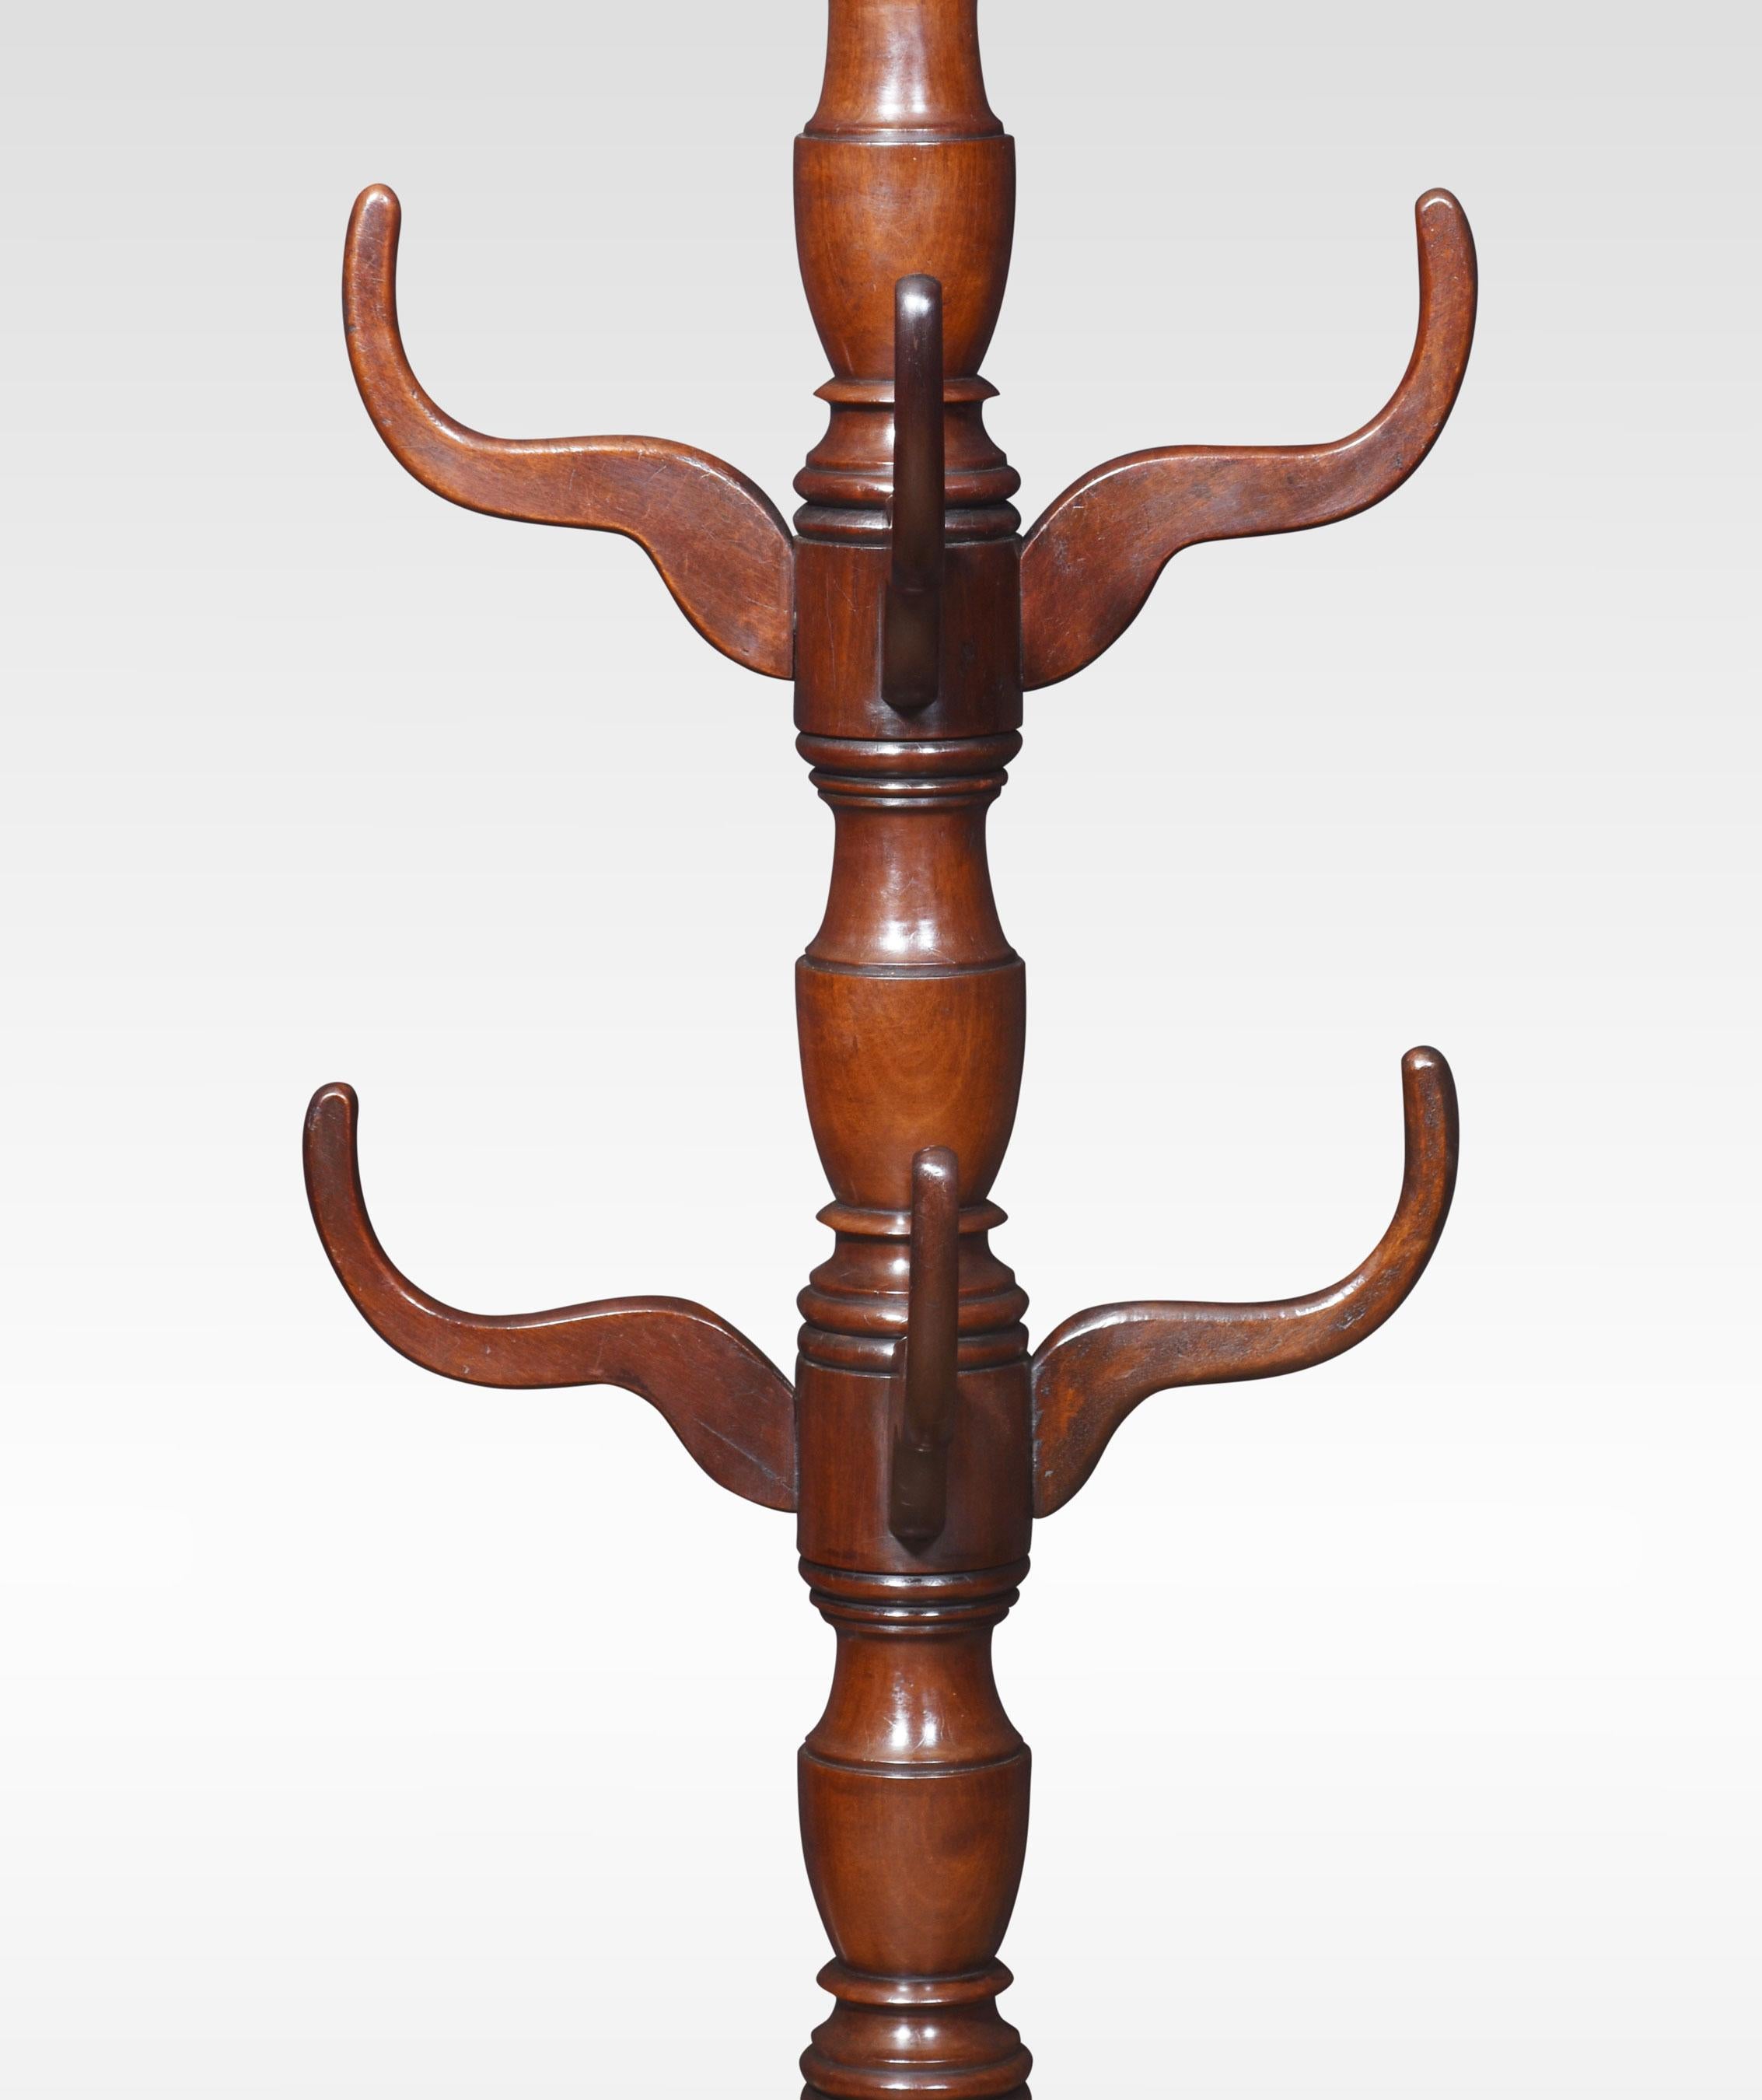 19th Century mahogany coat stand. The acorn finial above the turned stem is fitted with four tiers of three-coat hooks. All raised up on splayed supports.
Dimensions
Height 79 Inches
Width 24.5 Inches
Depth 22 Inches